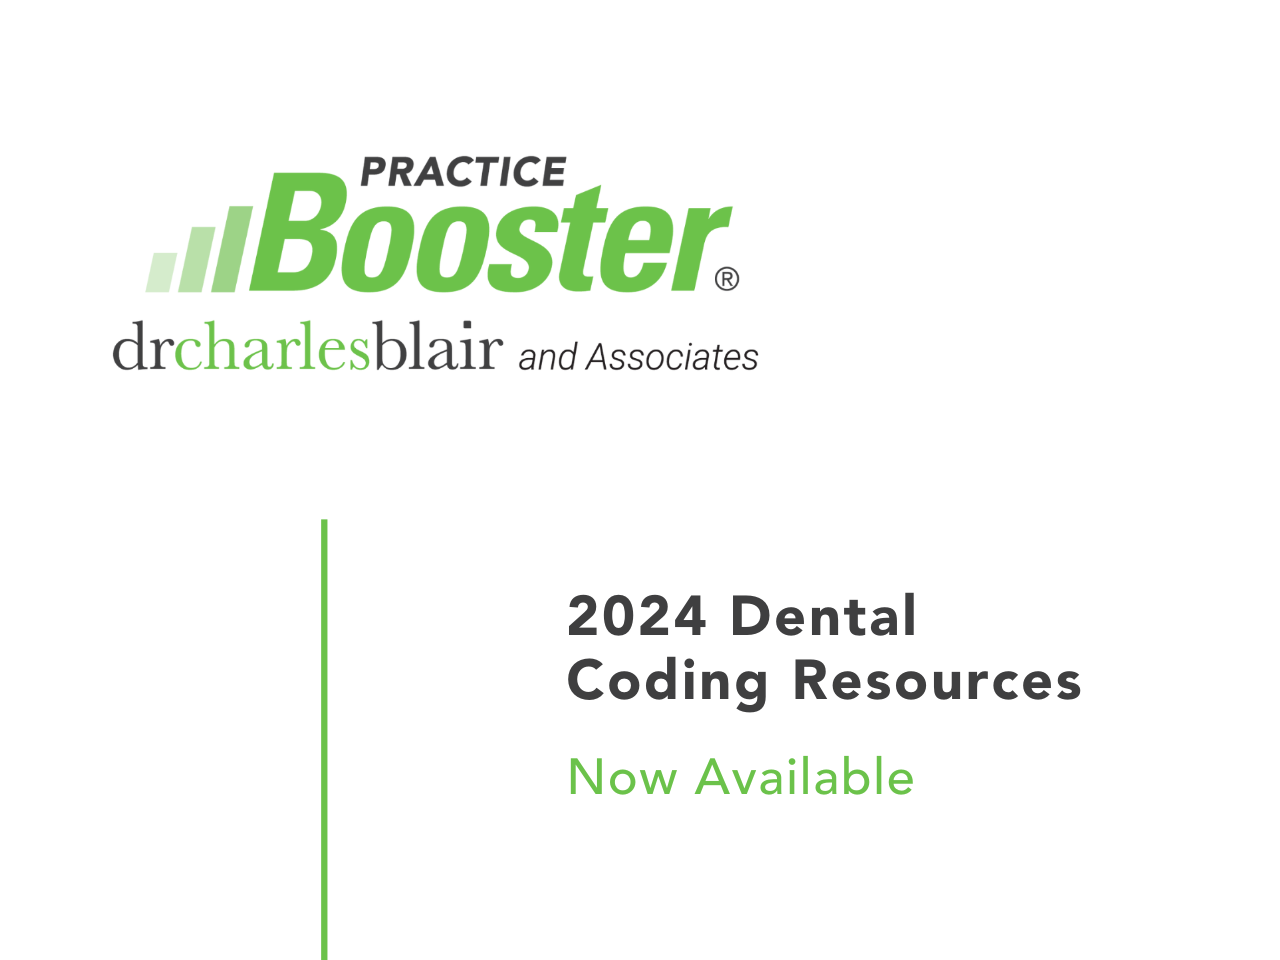 Practice Booster's 2024 Dental Coding Resources